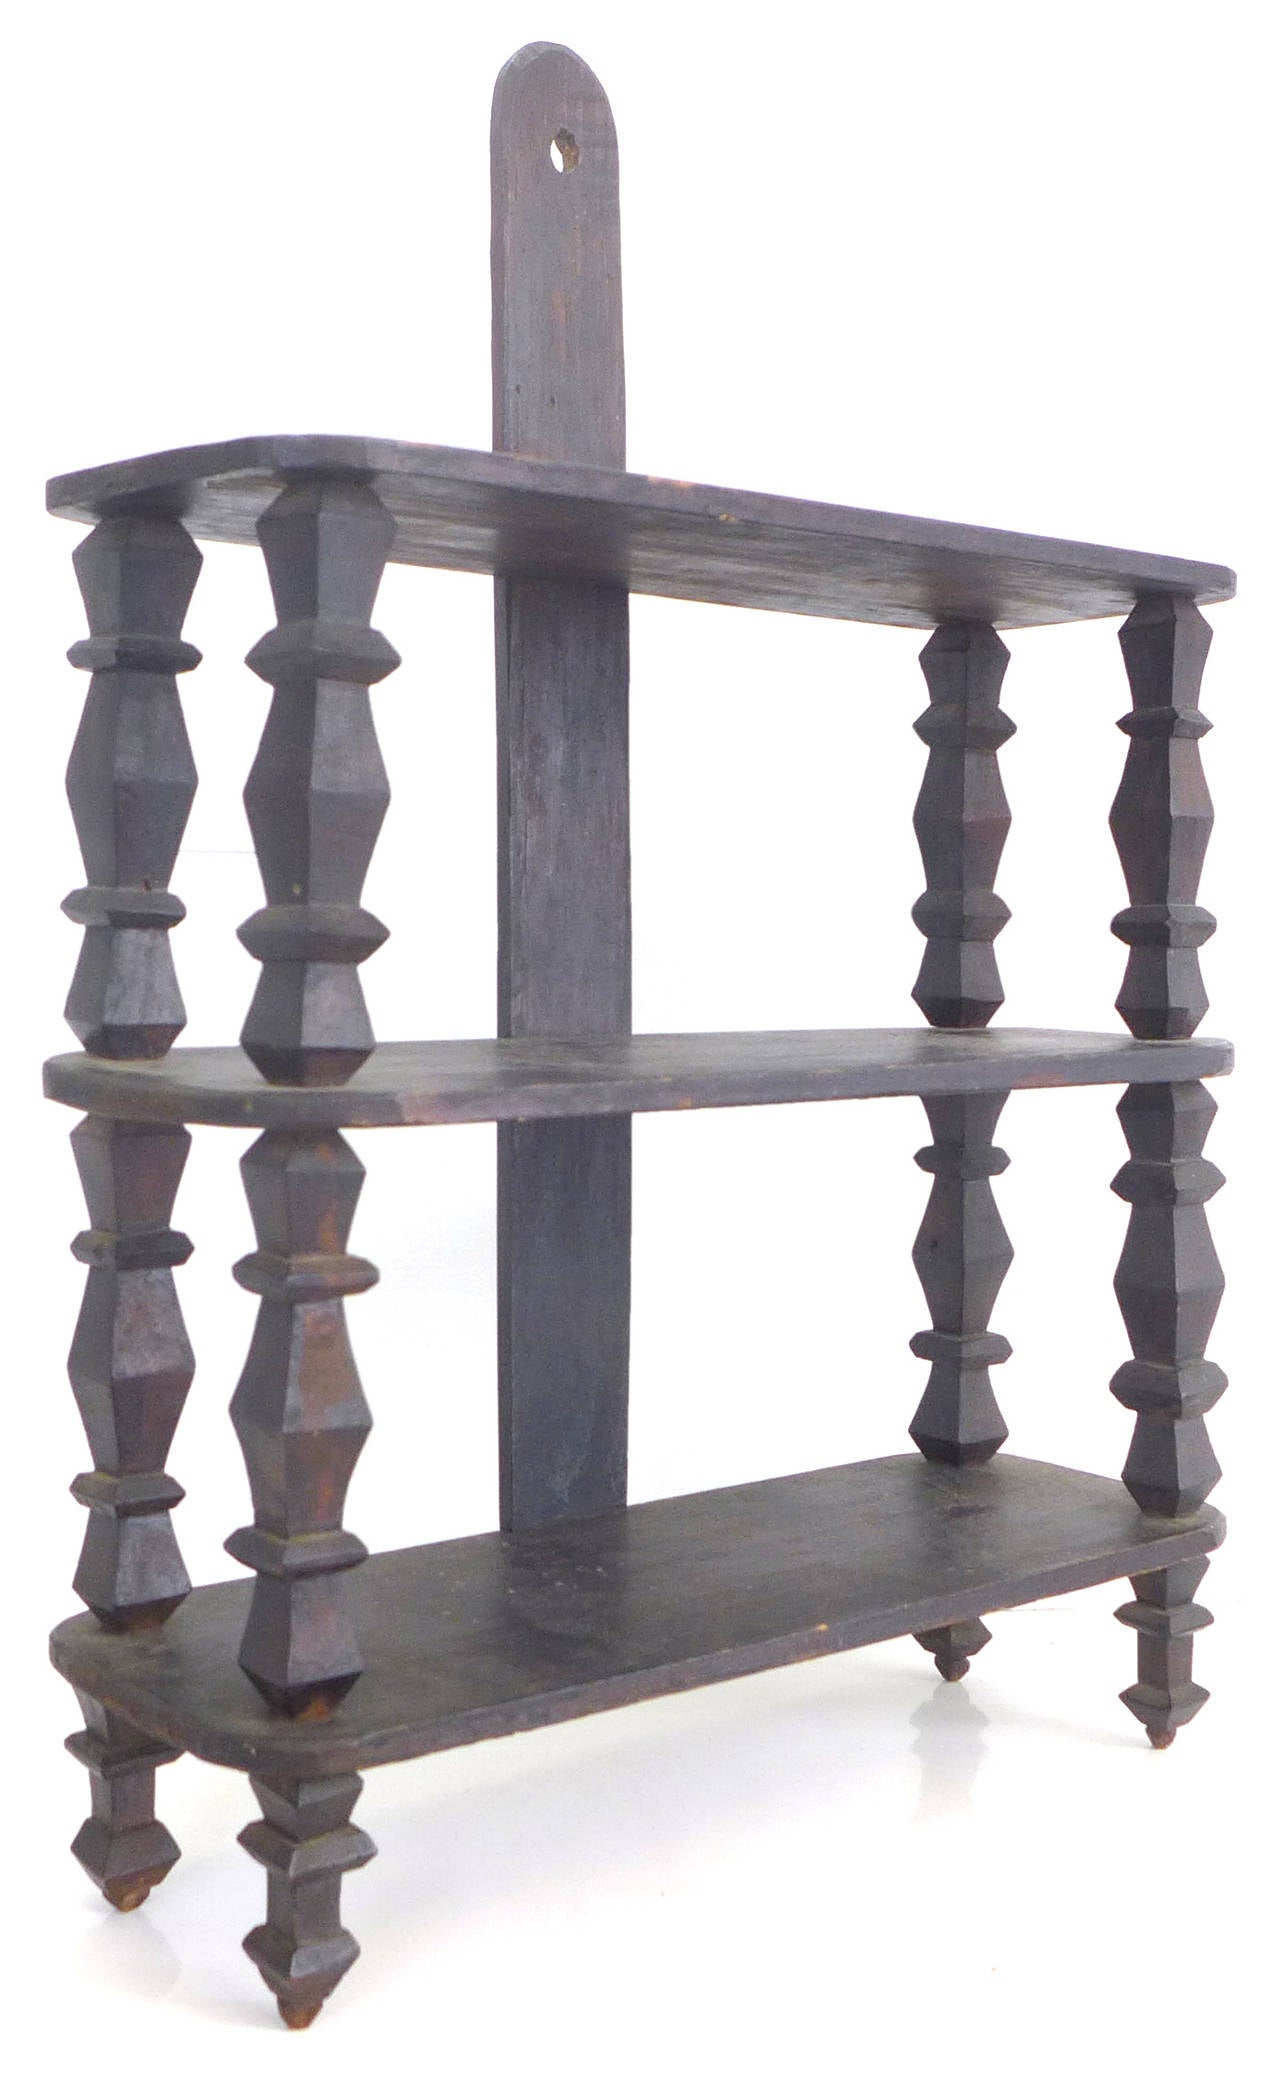 A compact, beautifully modernist, geometric, hand-carved-wood shelving unit.  Great detail and patina throughout.